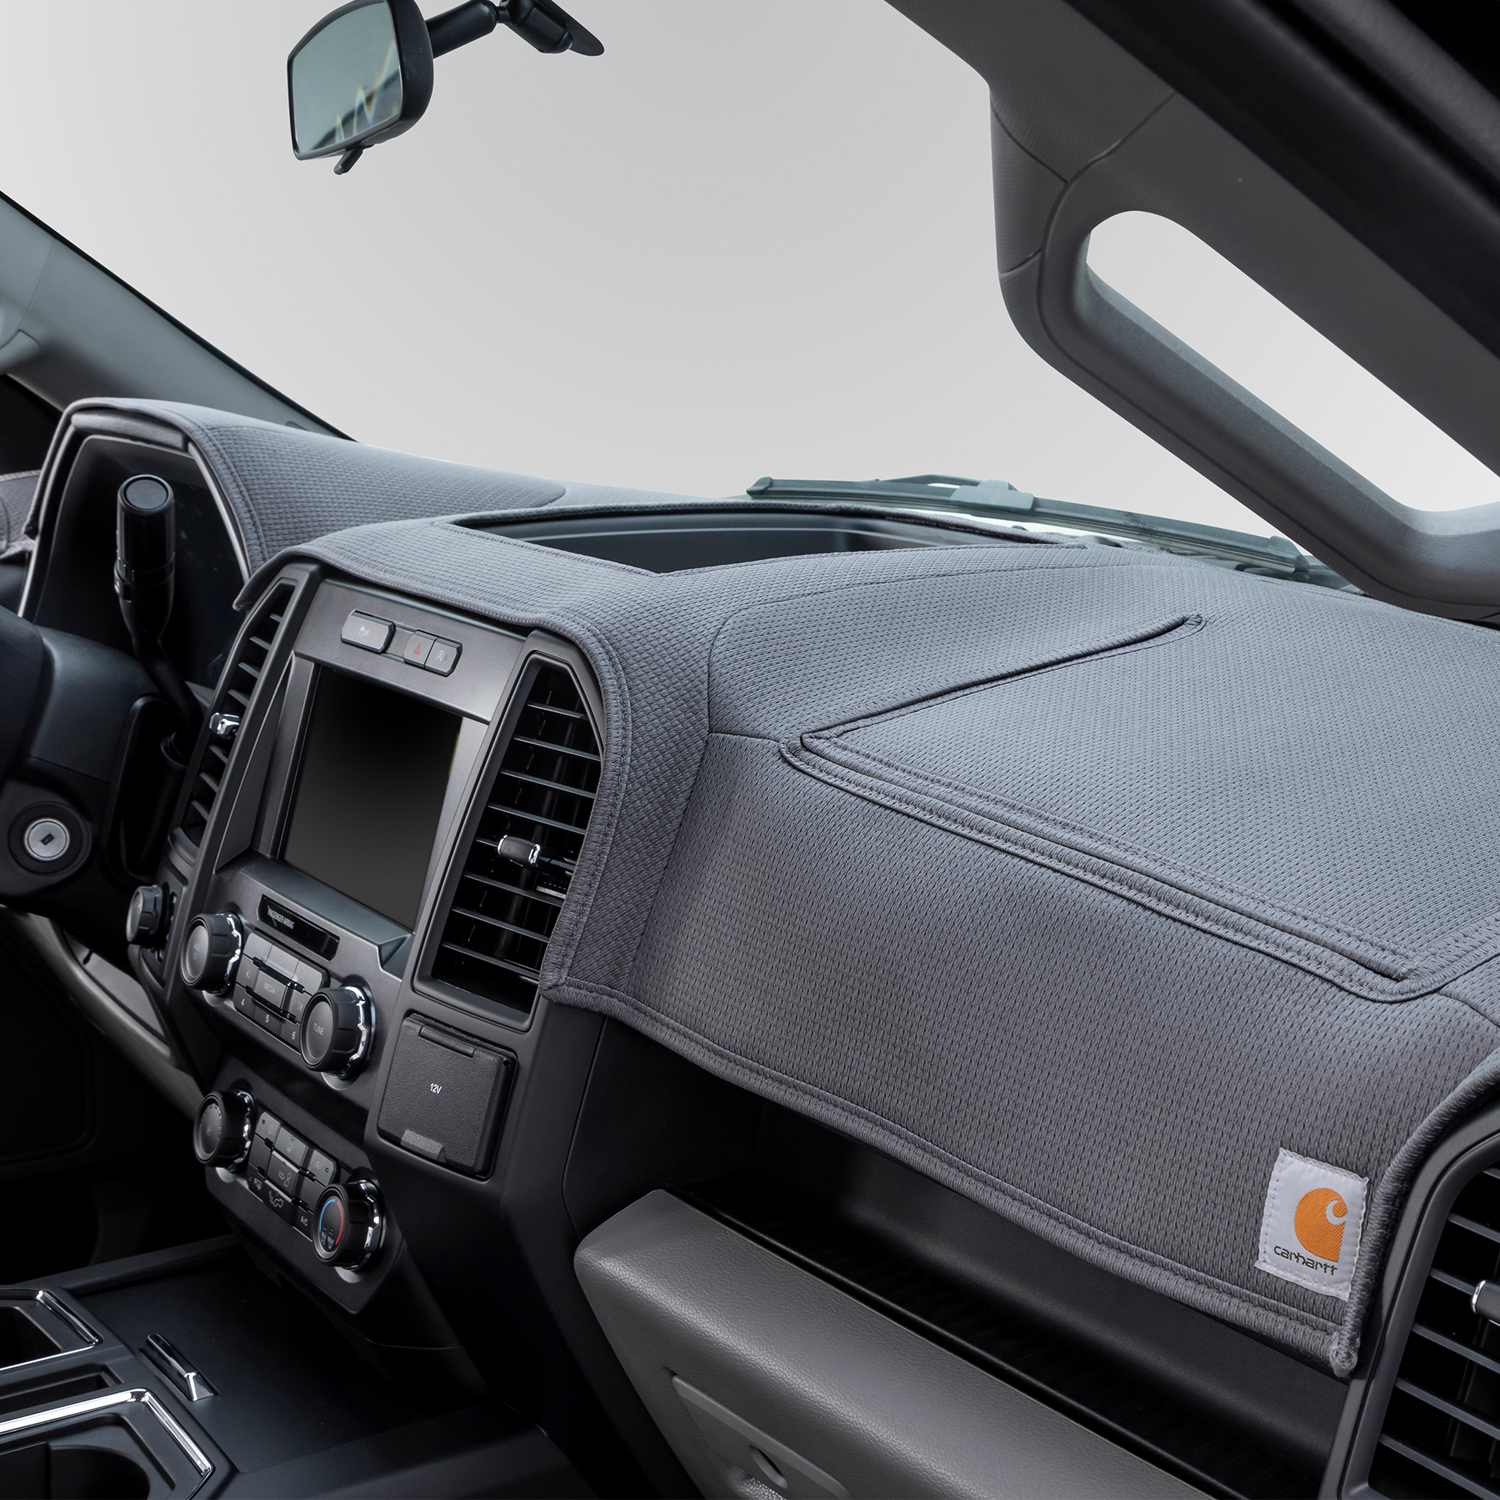 Are you ready to give your dash the rugged protection and style it needs? You cannot go wrong with our exclusive Carhartt LTD DashMat. These custom dash covers are designed to fit your specific dashboard to ensure you have maximum protection. Features a unique warp-knit design similar to your classic workwear for a rugged and sleek look. ashMat you are getting the ultimate protection to keep your speakers from cracking.</i></p>        <p>Transform the look of your truck today while giving your vehicle the protection it needs. Perfect for work trucks to keep dust and grime off your dash while adding a rugged look to command attention.</p>